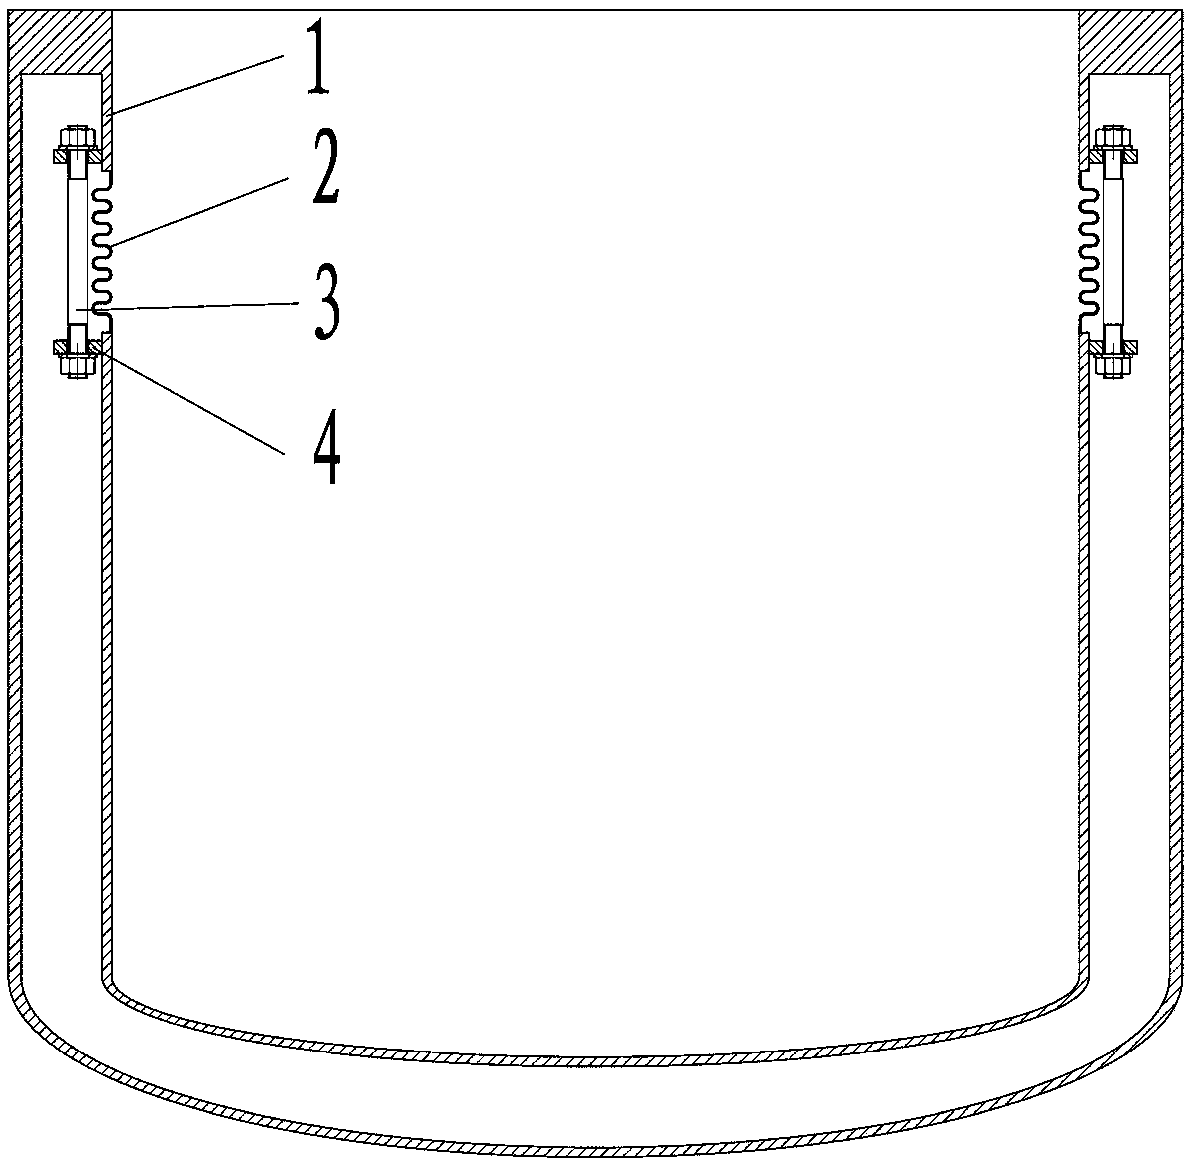 Inner side wall structure of vertical low-temperature container and vertical low-temperature container